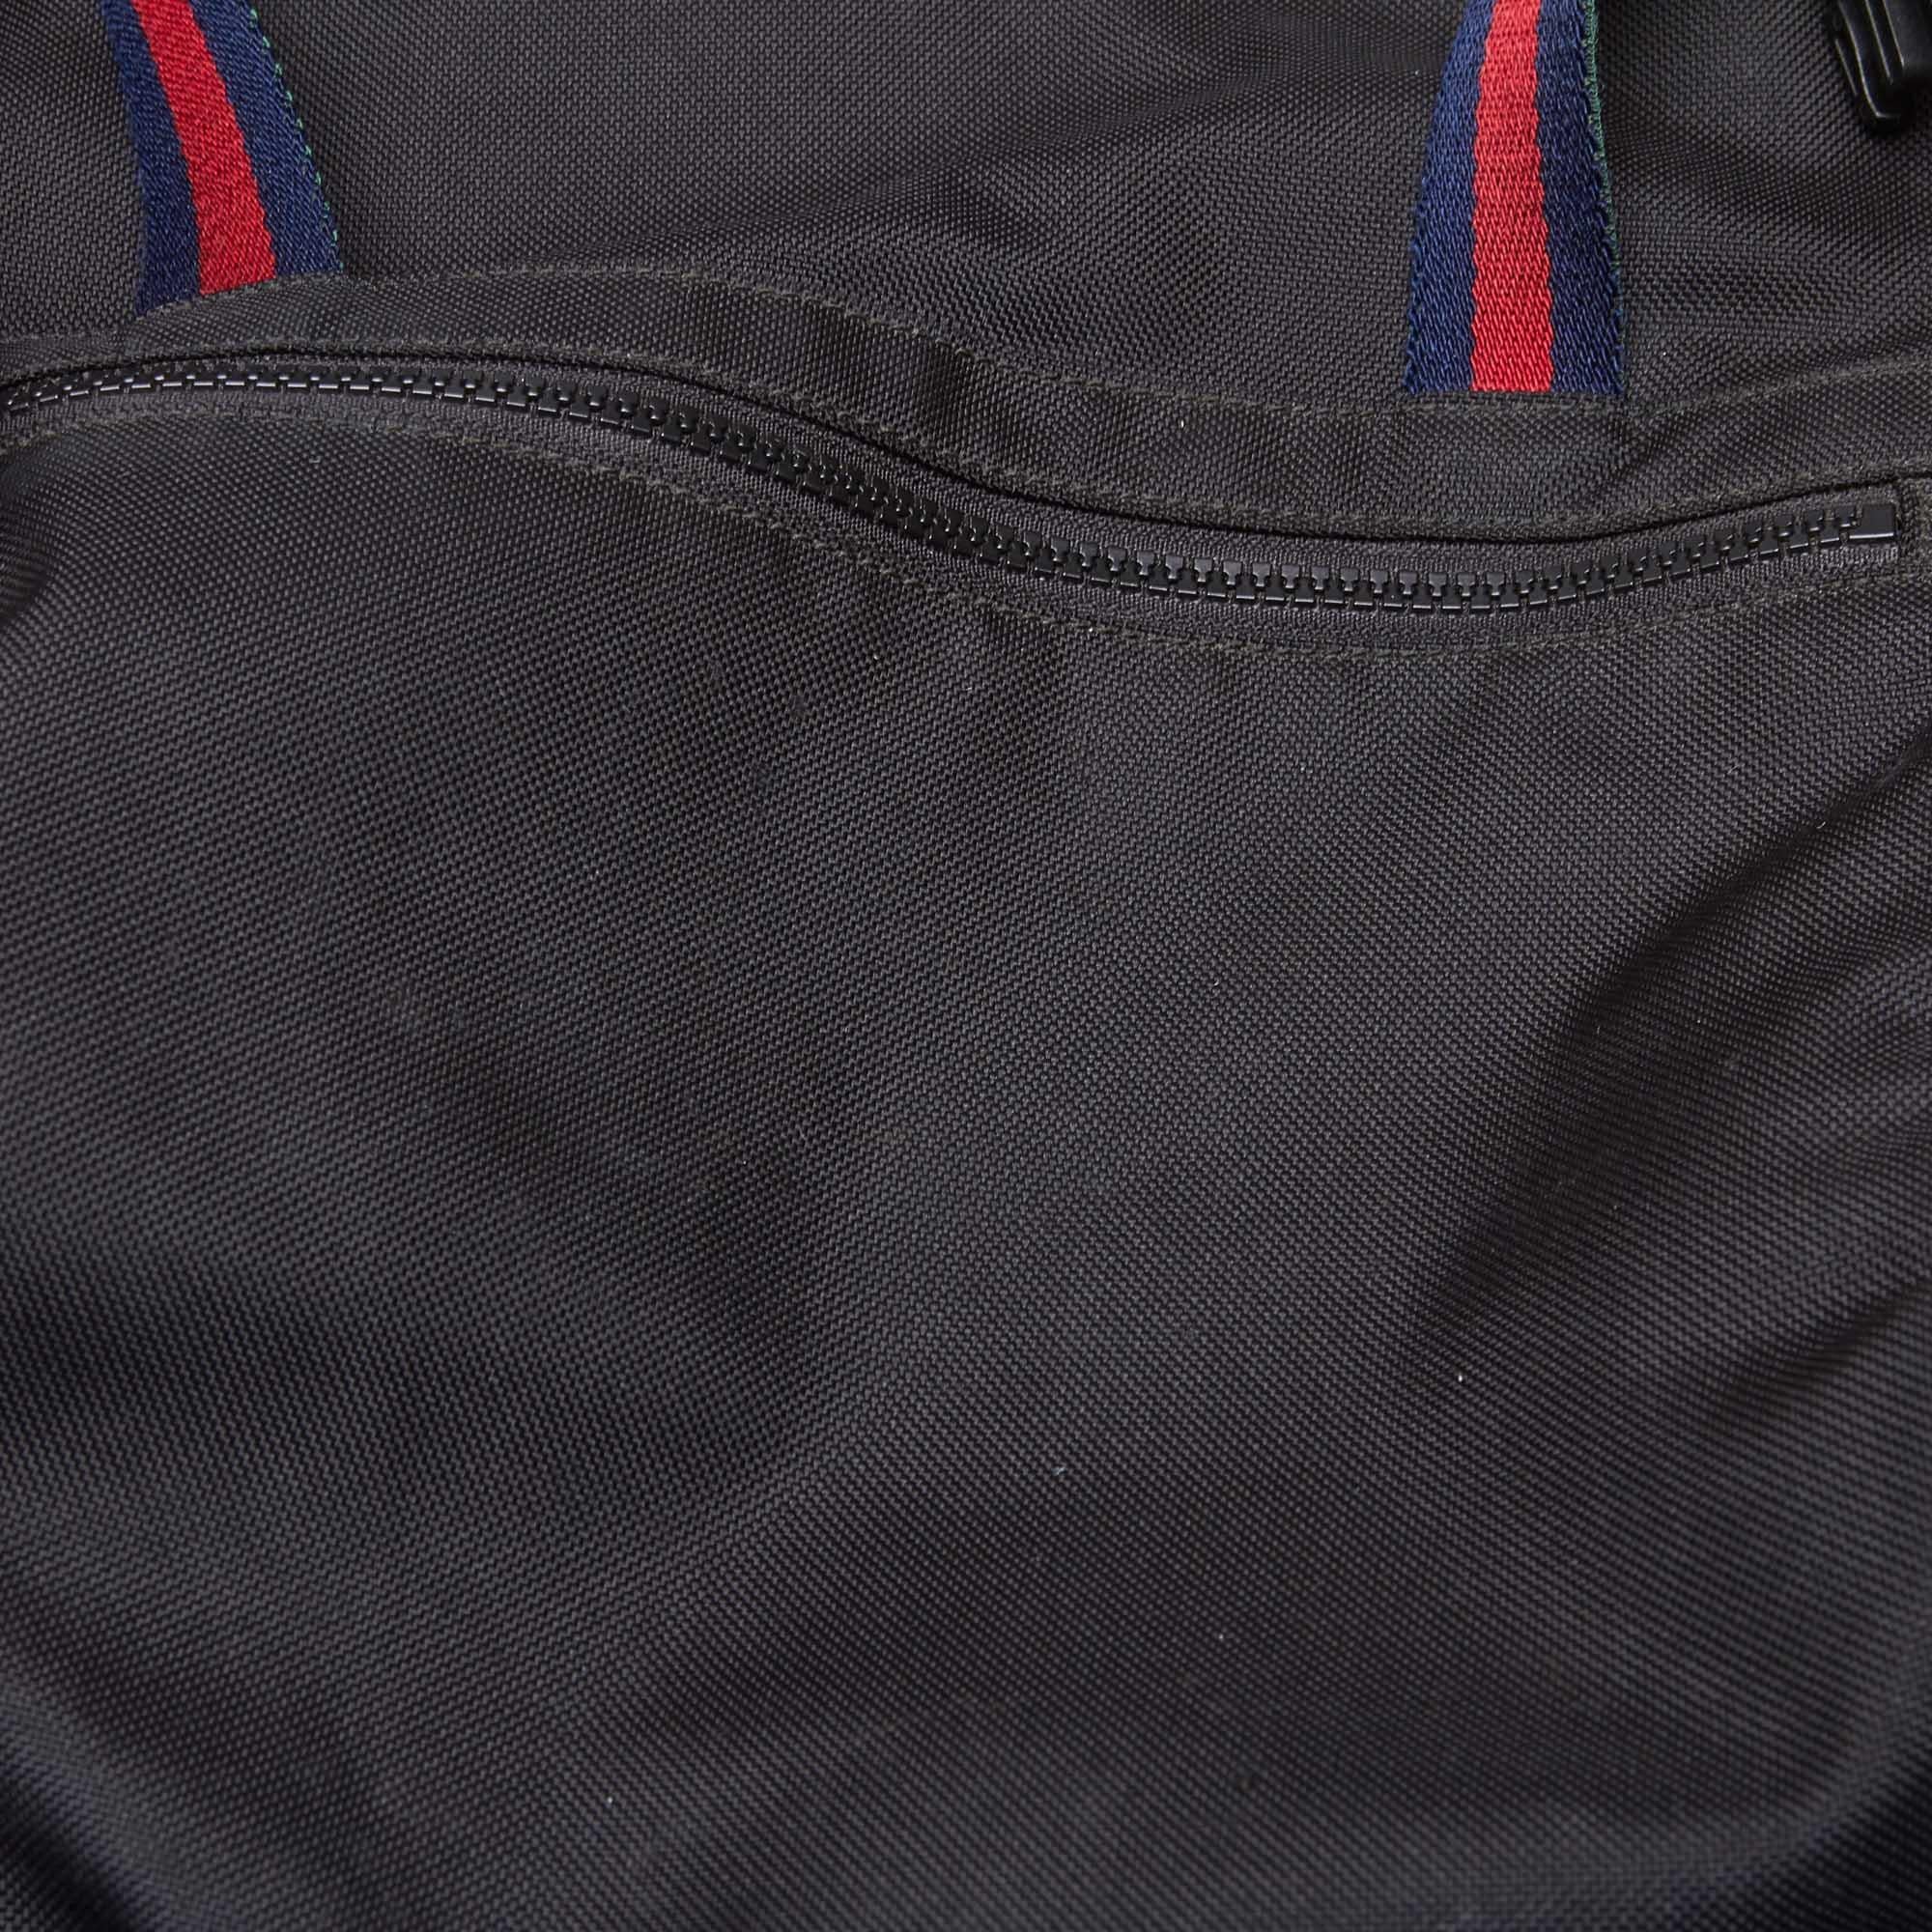 Vintage Authentic Gucci Black Canvas Fabric Techno Web Backpack Italy LARGE  For Sale 6